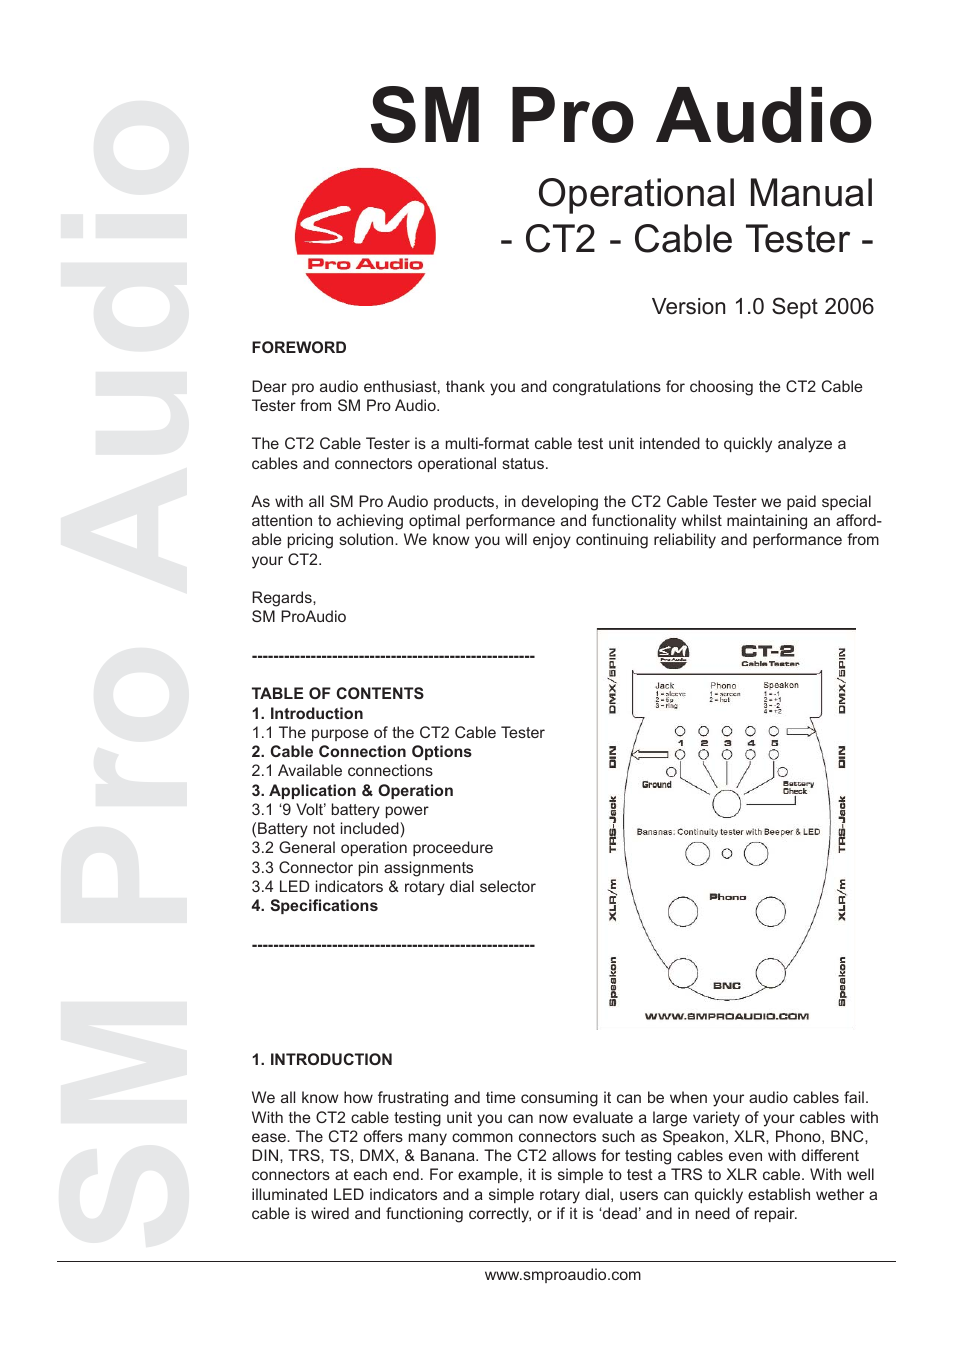 CT-2: Cable tester